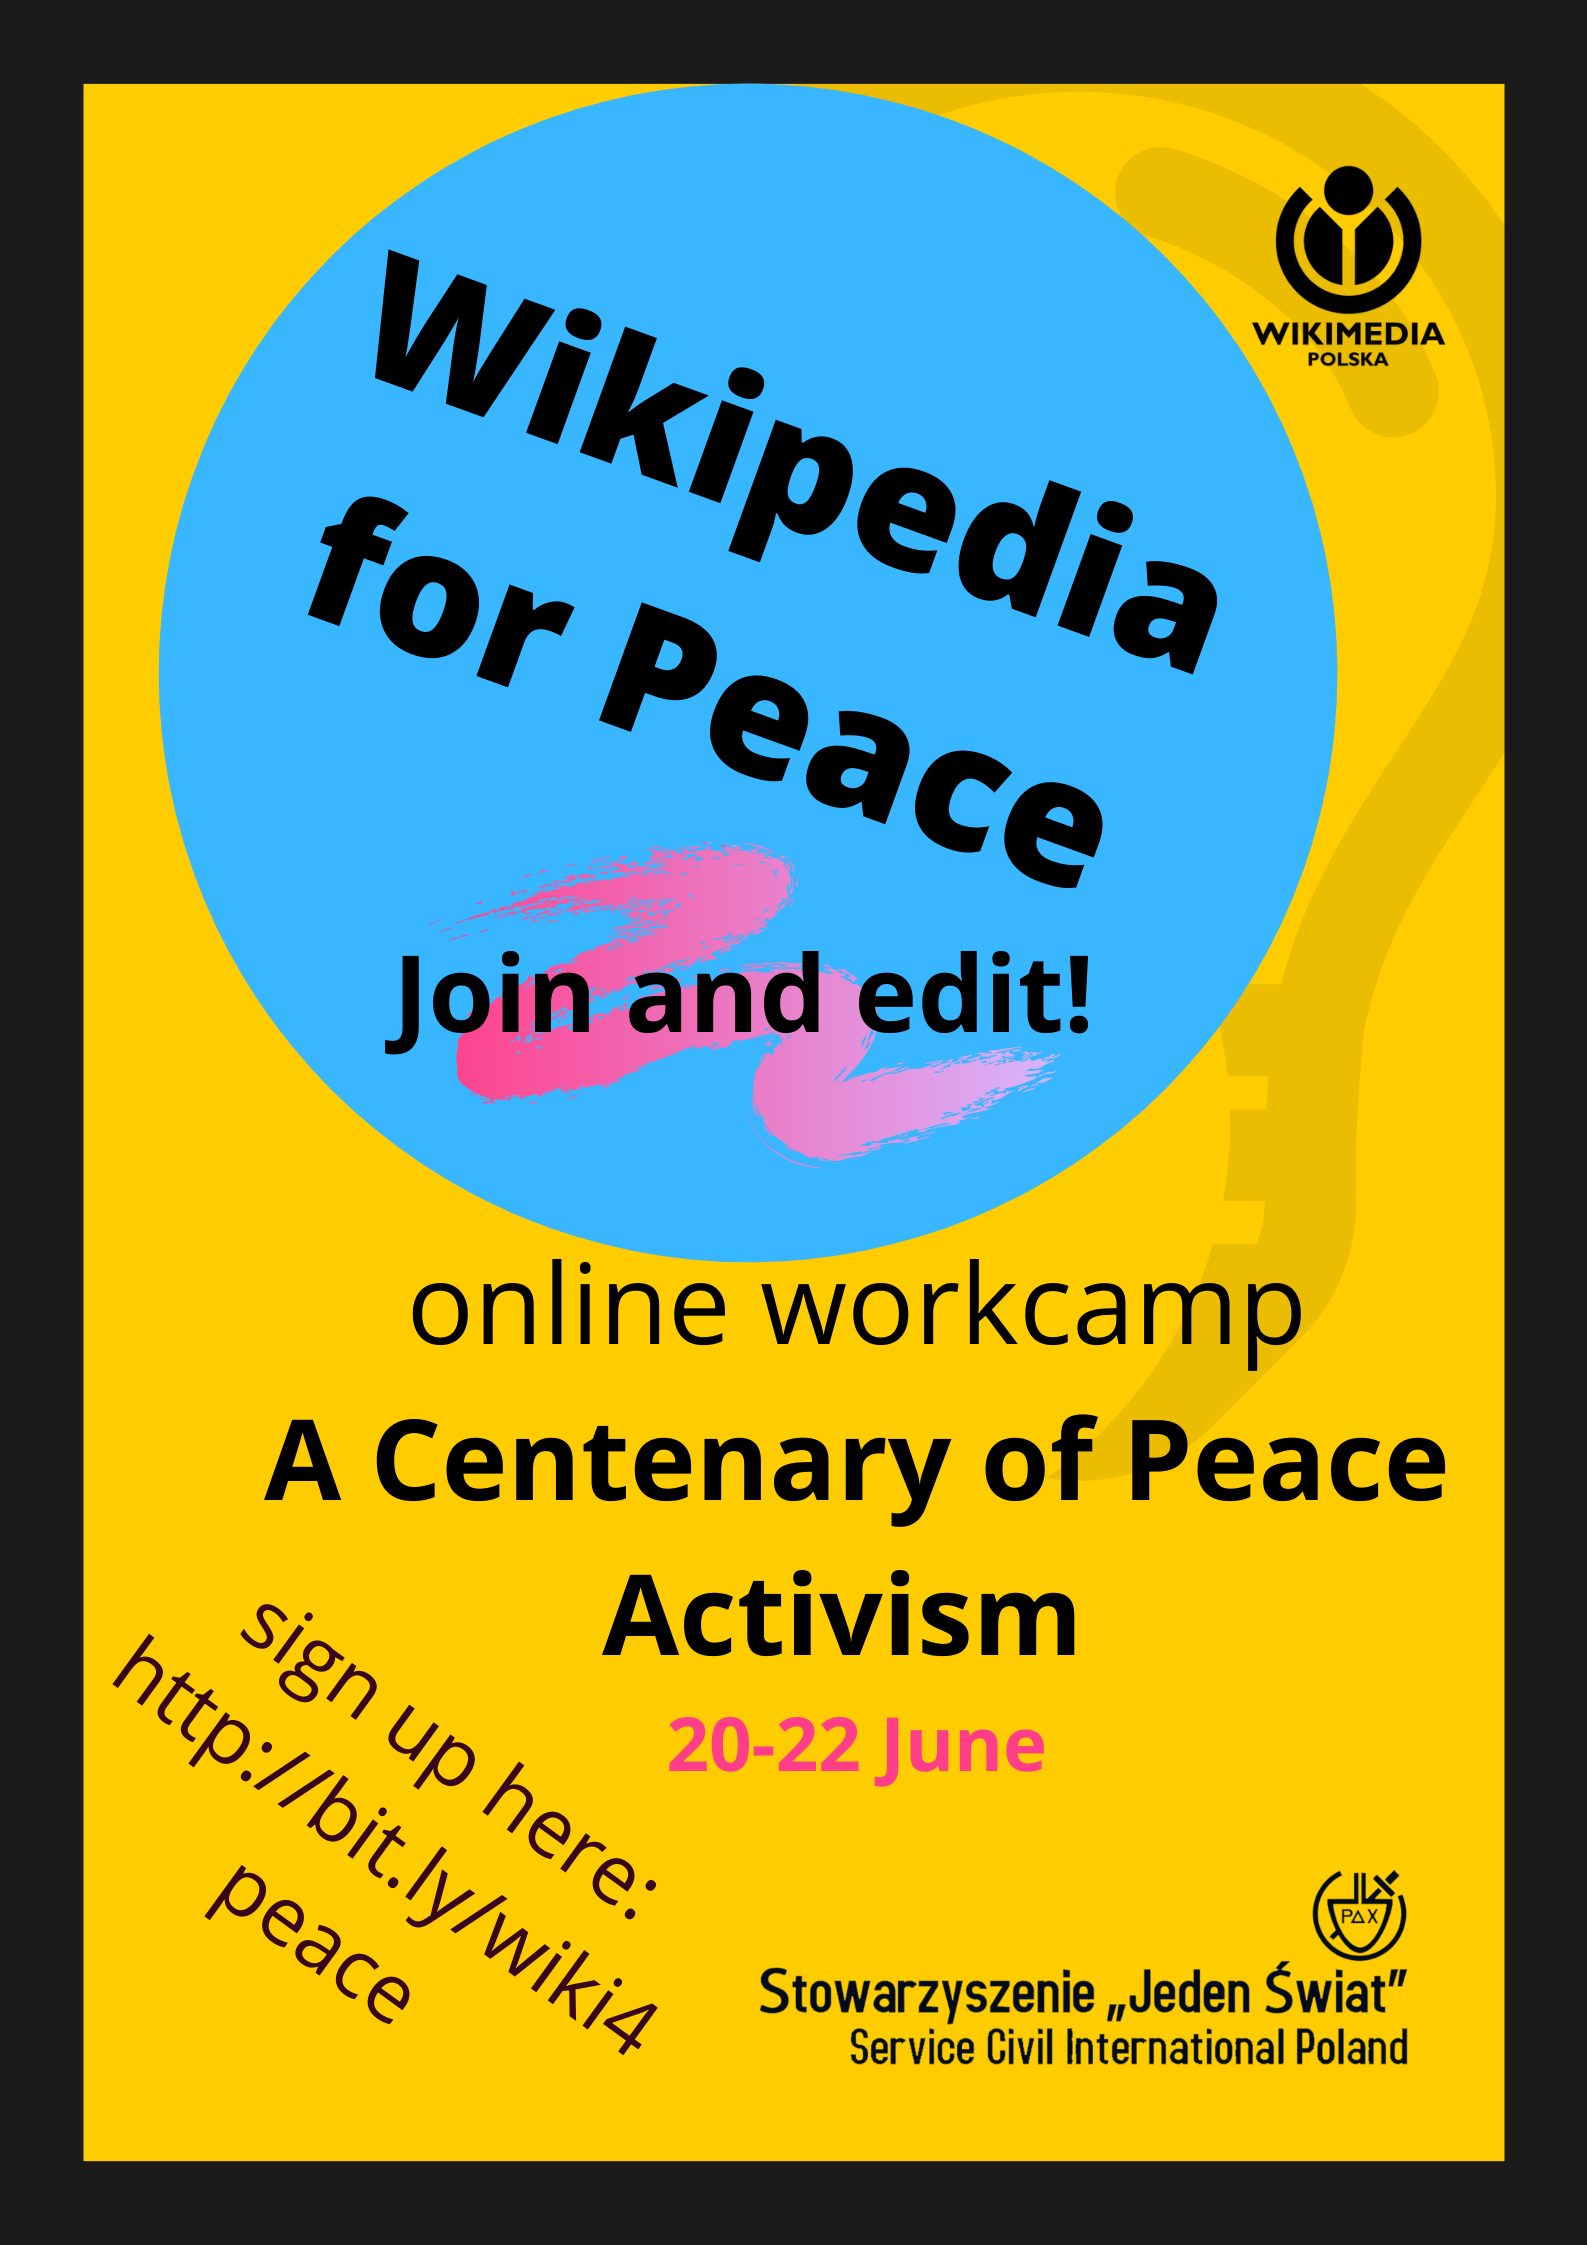 Wikipedia for Peace - A Centenary of Peace Activism